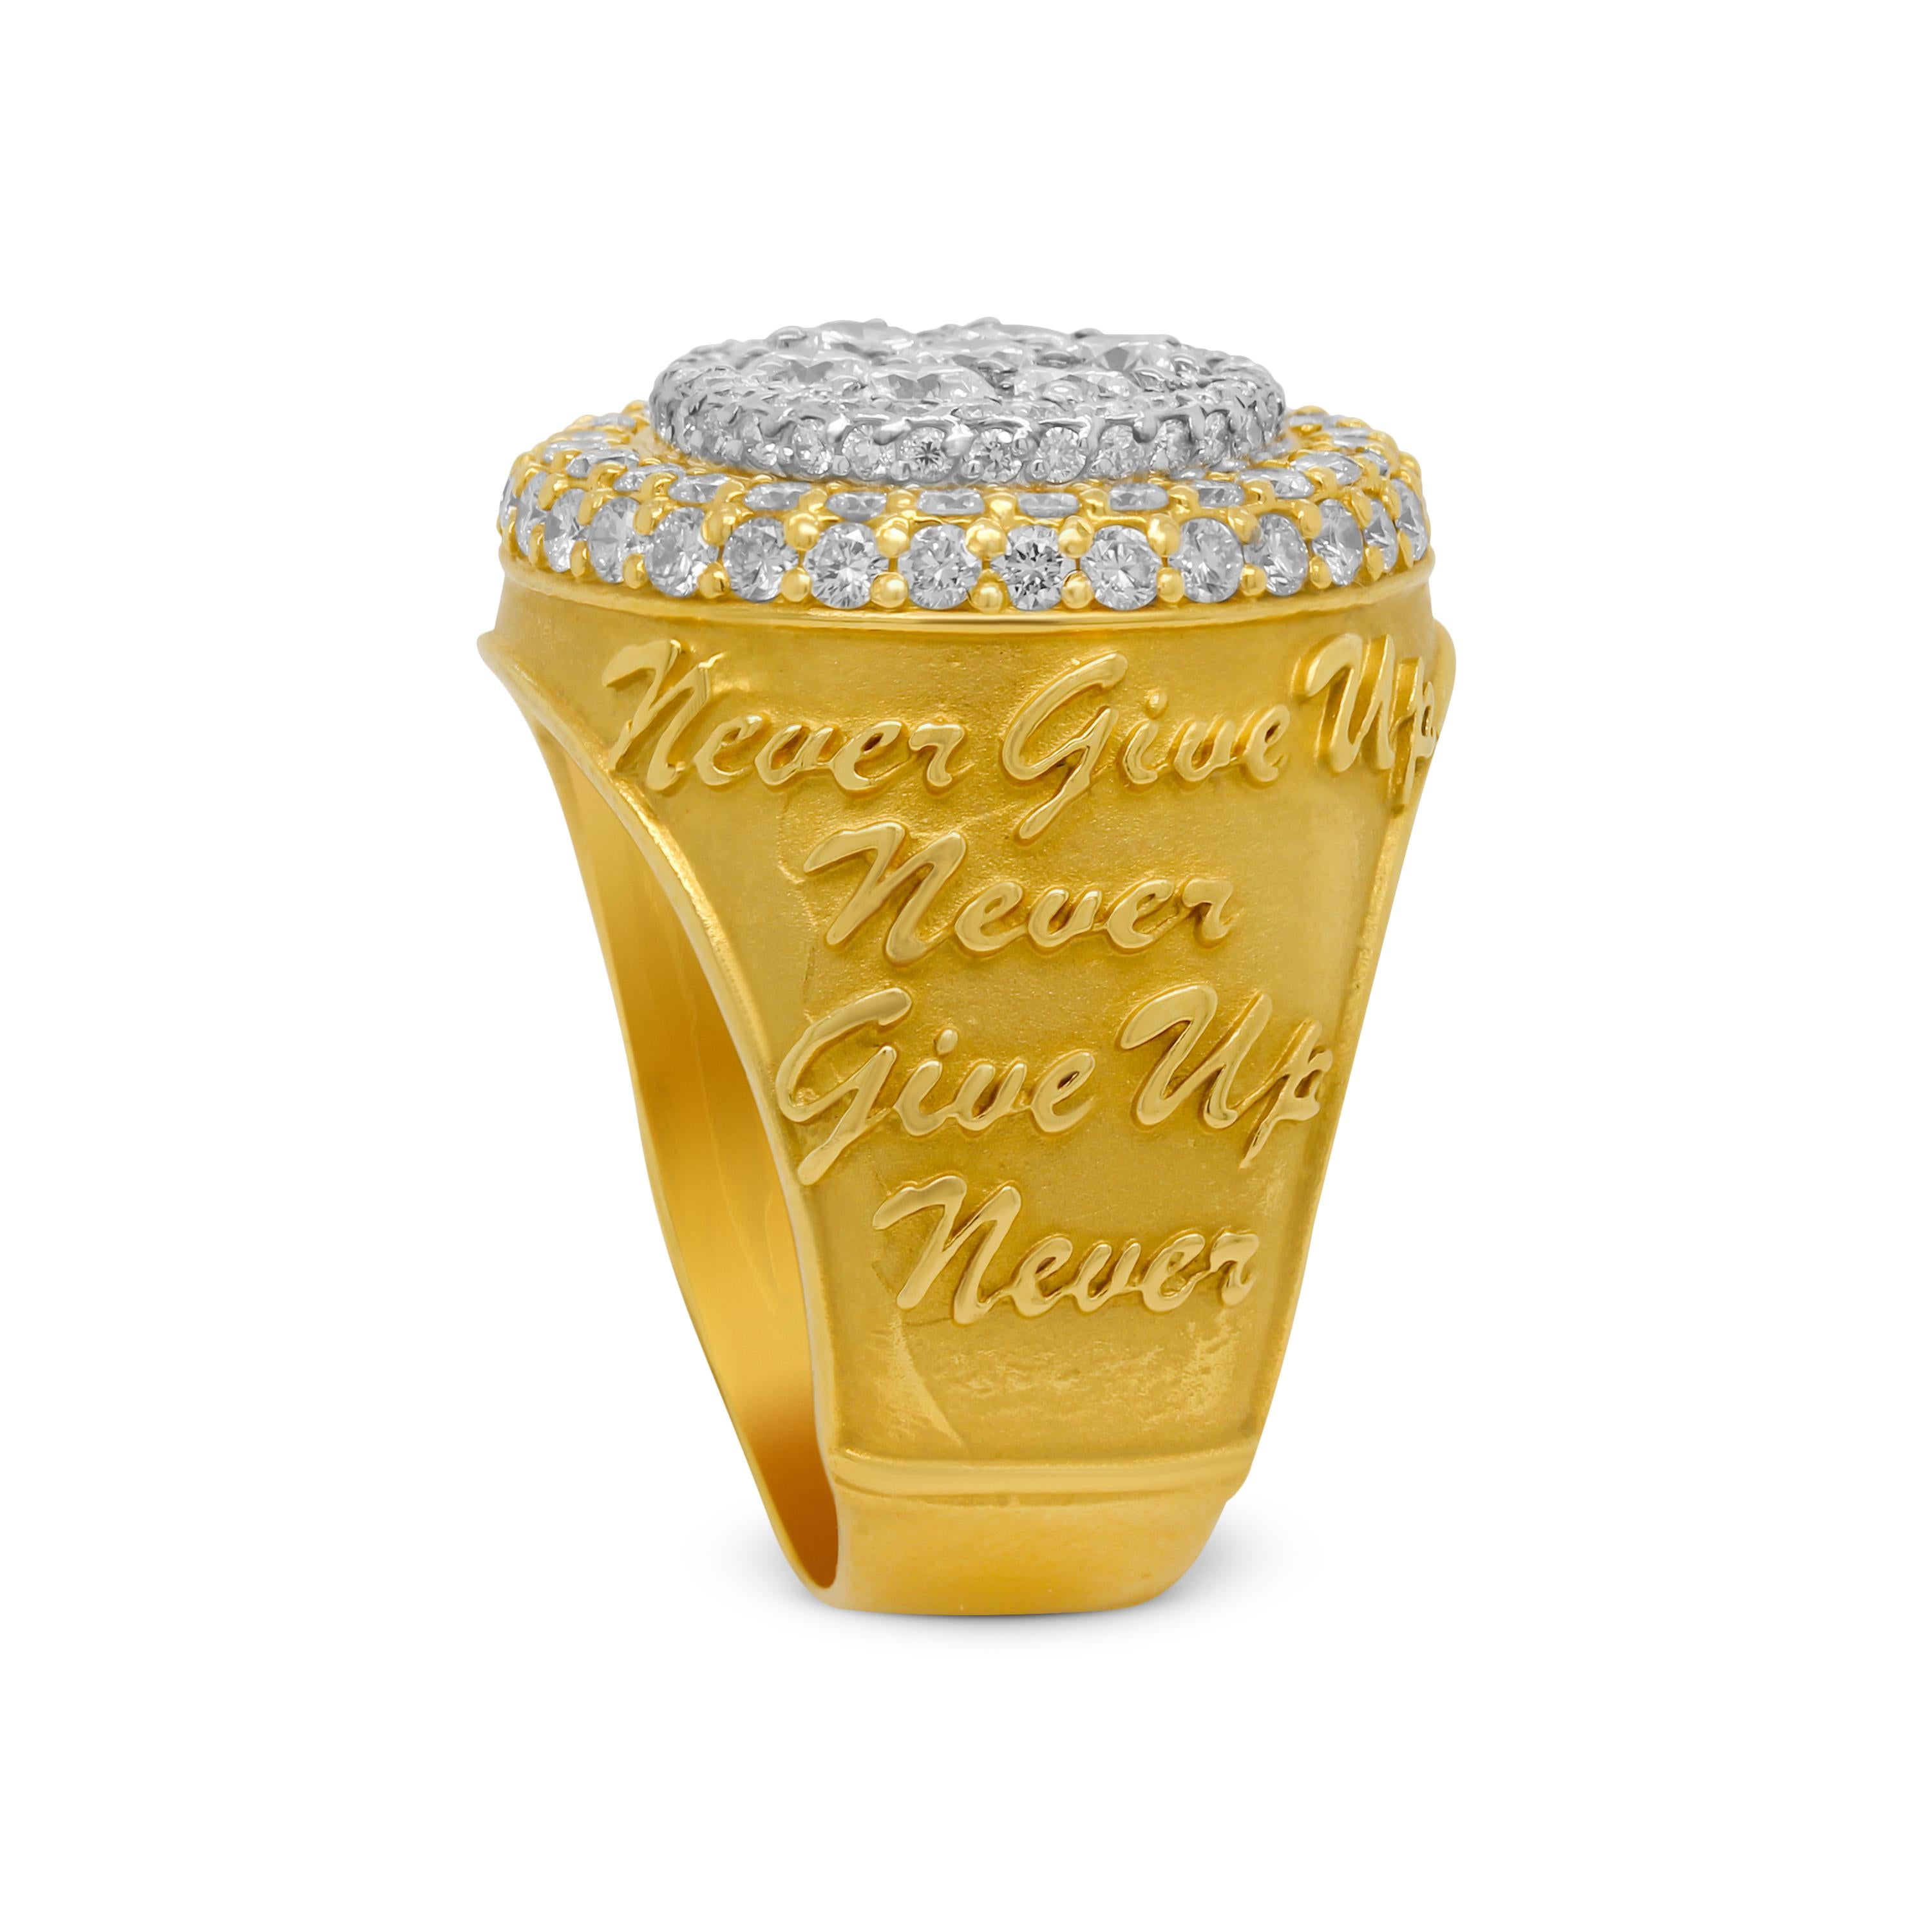 Stambolian 18K Gold Diamond Phoenix Bird Never Give Up Mens Ring

This state-of-the-art mens ring by Stambolian is a signature of their 2019 mens collection featuring diamonds in the center and a message on both sides.

One side of the ring reads